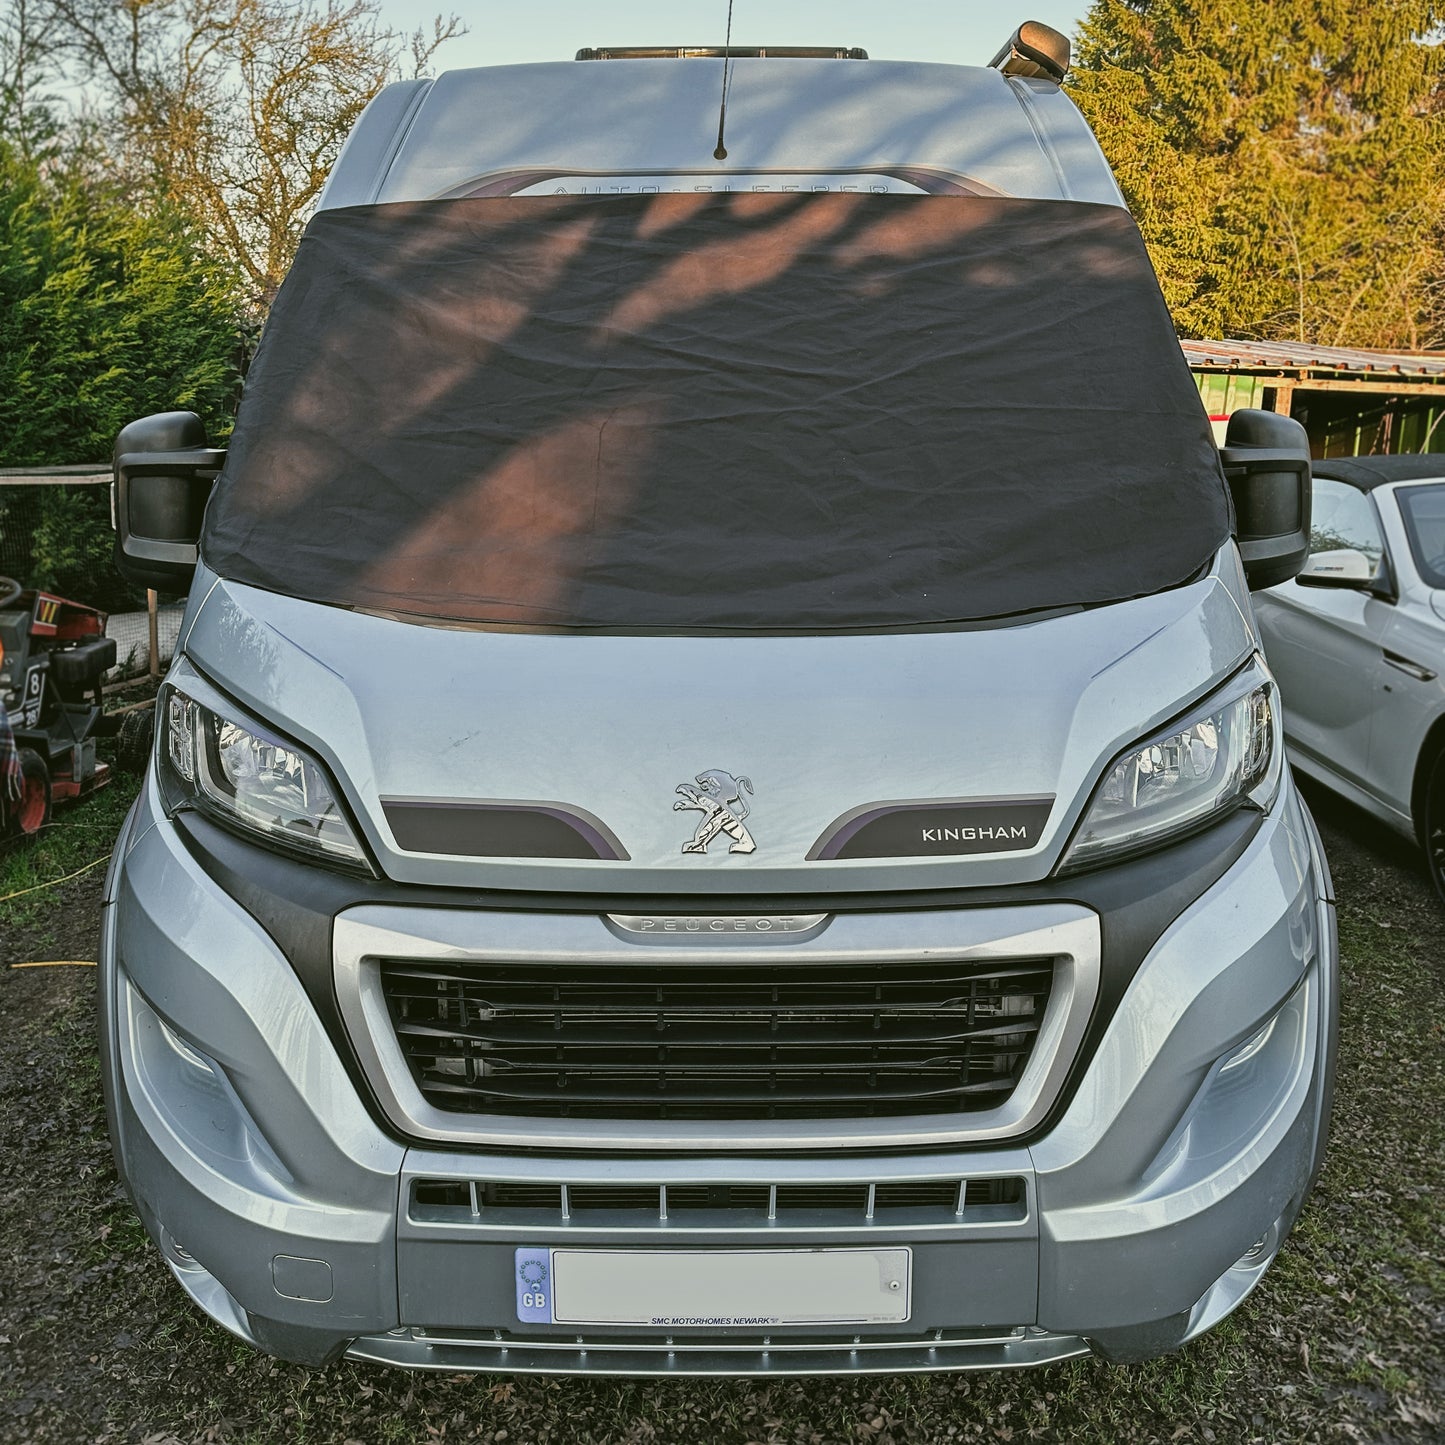 Ducato, Boxer Relay 2006 + Screen Cover (WITH REMIS BLINDS)